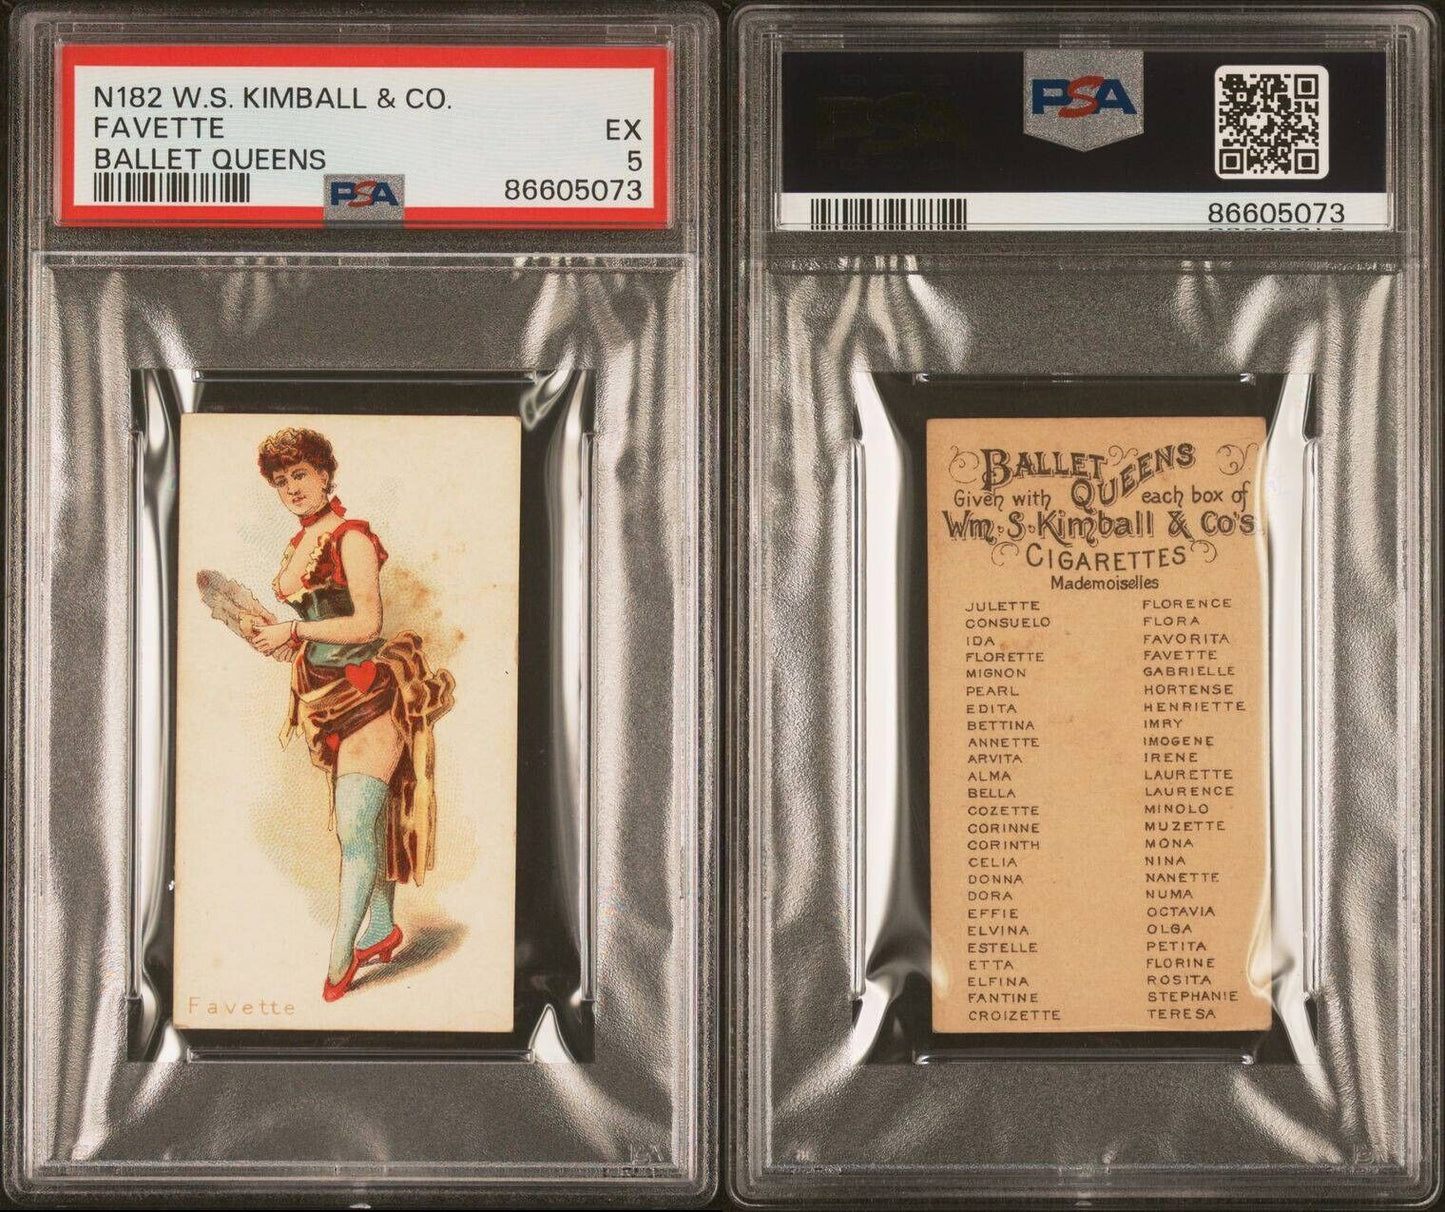 1889 W.S. Kimball & Co N182 BALLET QUEENS Favette (PSA 5 EX)